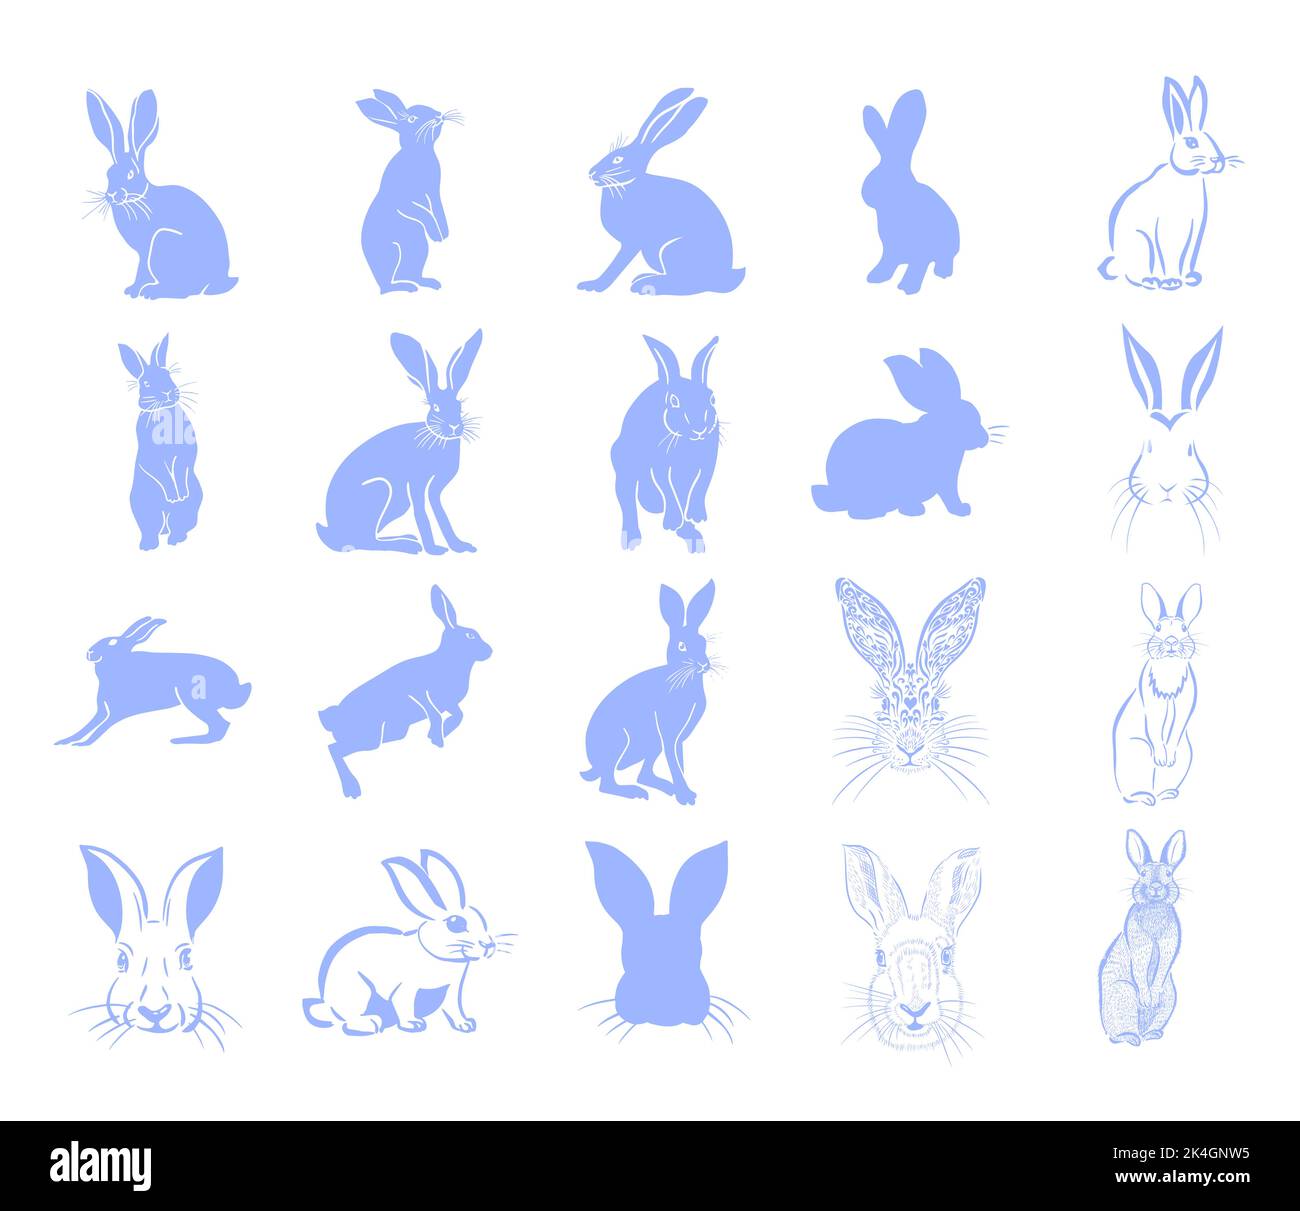 Blue silhouettes of rabbits. Vector illustration Stock Vector